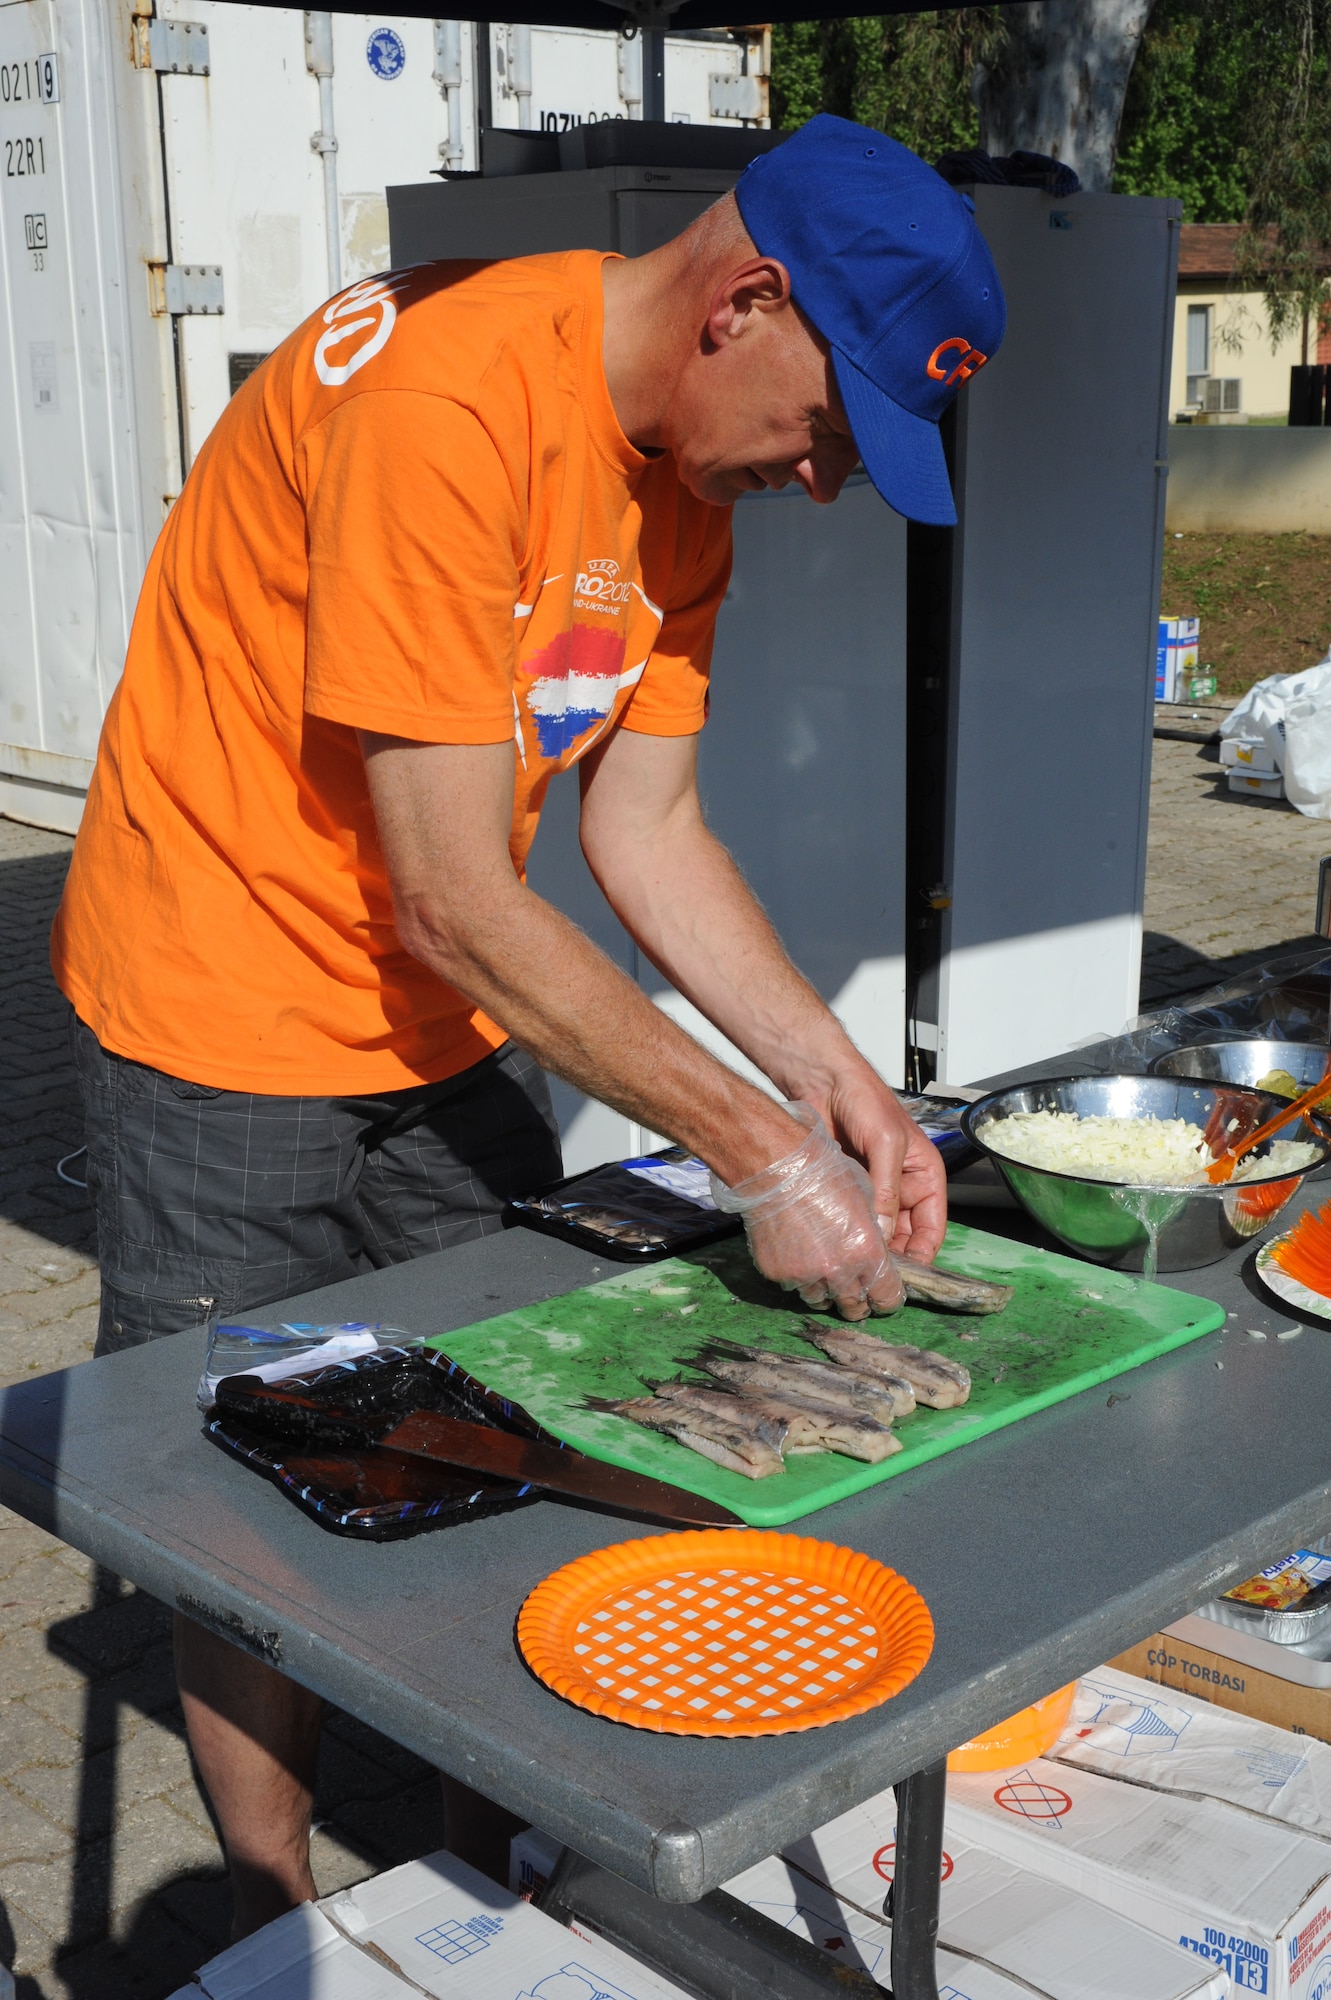 A soldier from the Dutch army prepares raw herring, a typical Dutch food called maatjesharing, during Koninginnedag, or Queen’s Day, celebration held at Arkadas Park April 25, 2013, Incirlik Air Base, Turkey. The Dutch invited U.S. and Turkish personnel to attend the event that included Dutch food, a touwtrekken toernooi (tug-of-war tournament), live music and a bonfire. (U.S. Air Force photo by 1st Lt. David Liapis/Released)